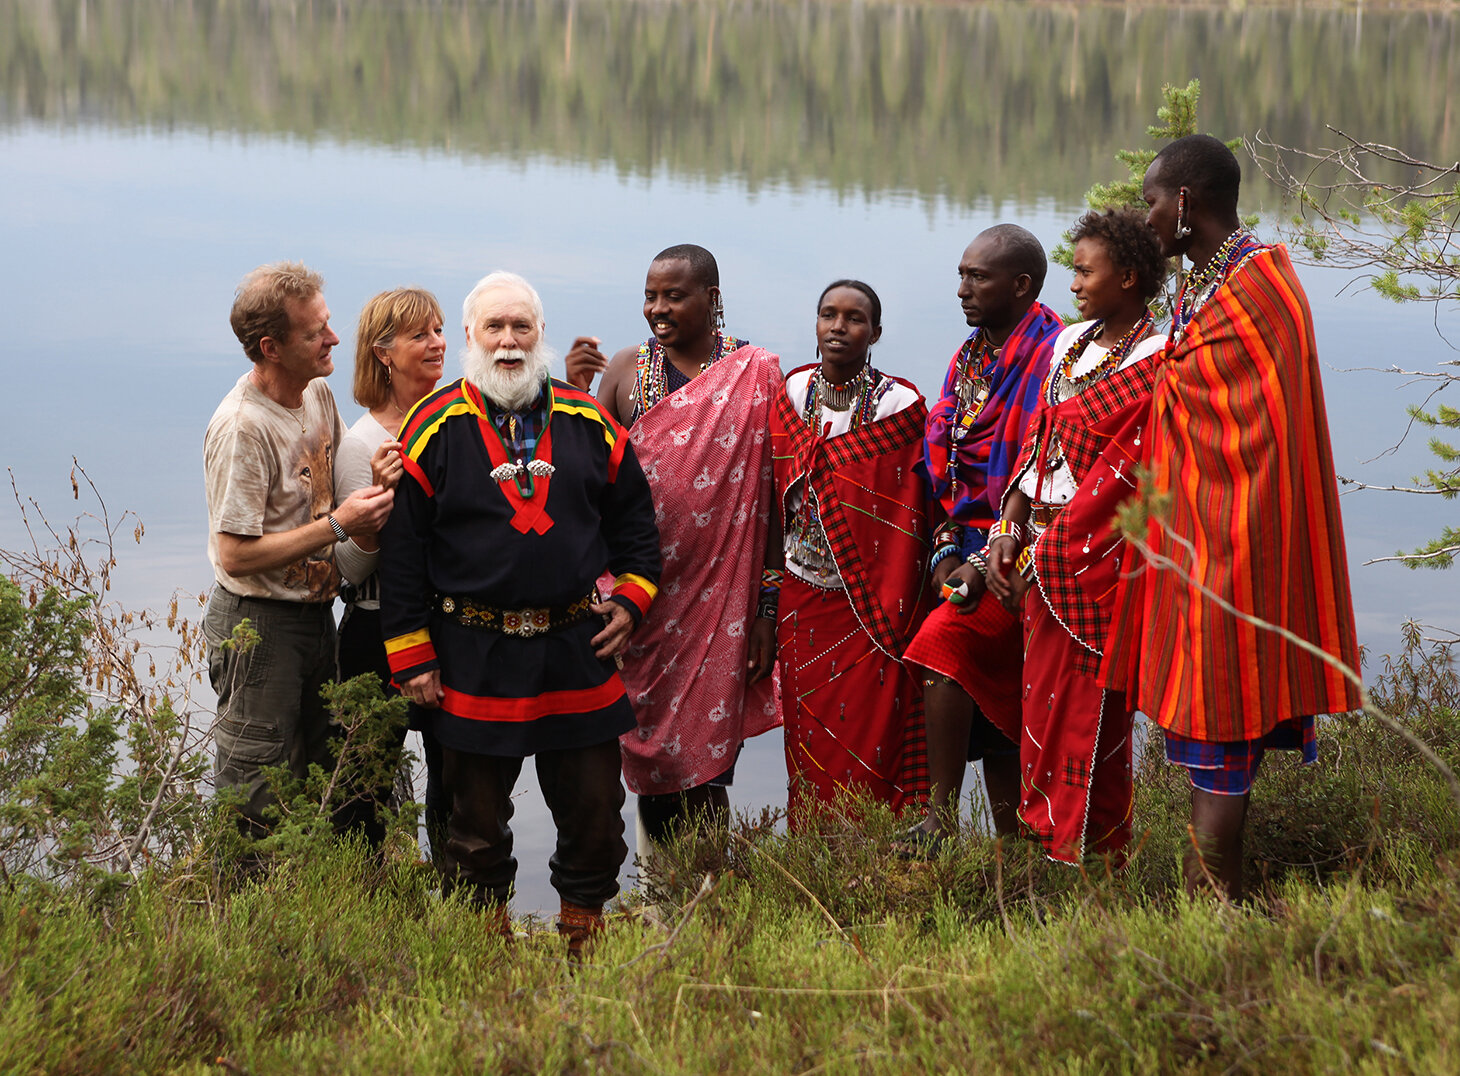 We tell about the Maasai visit in Sweden…